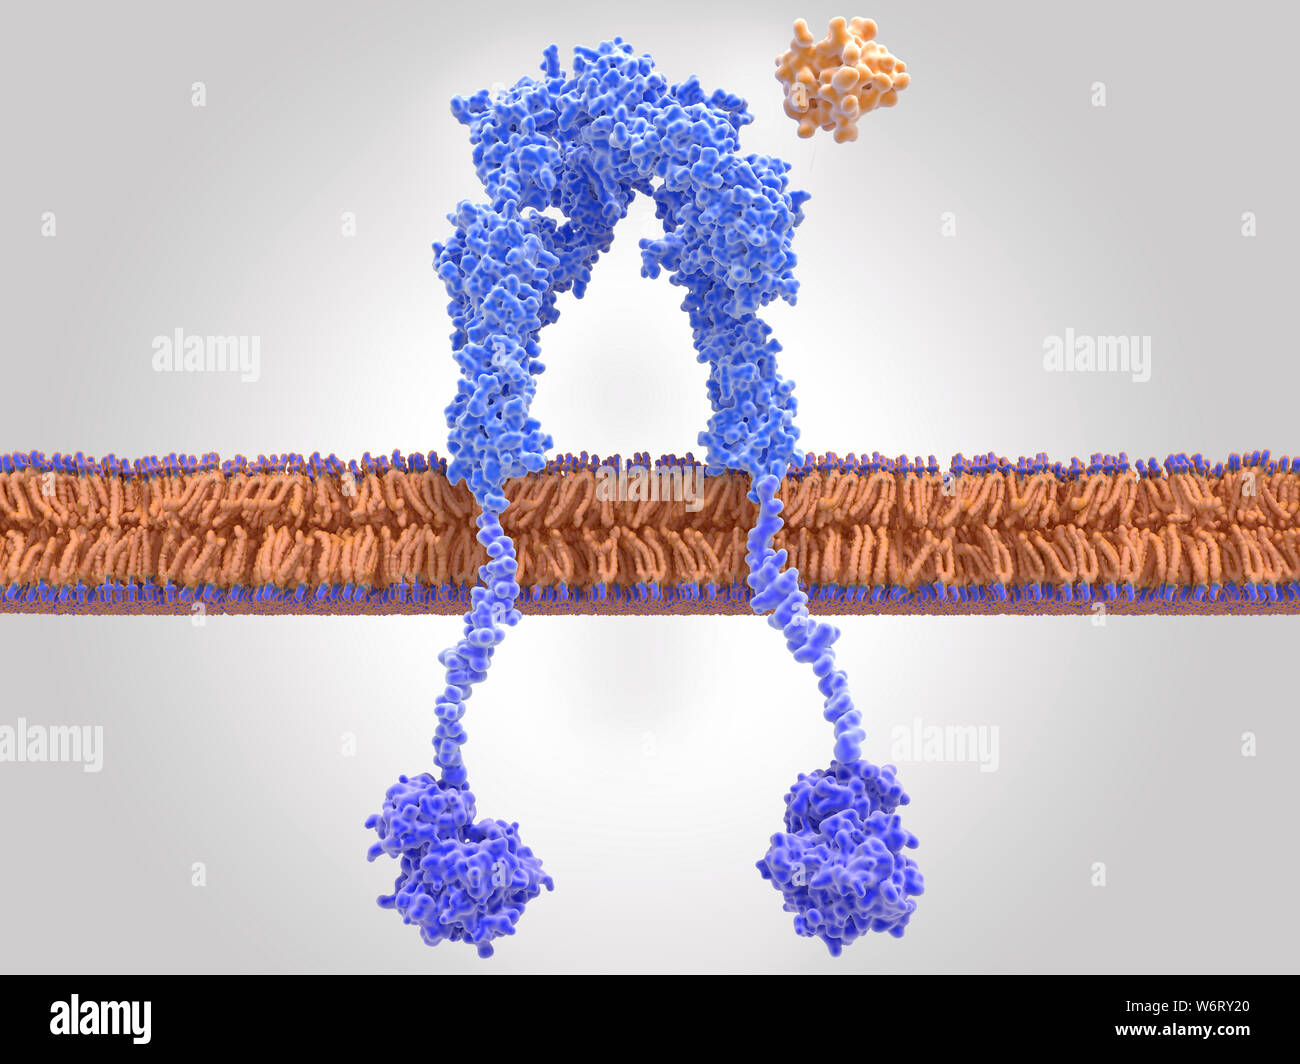 Inactive insulin receptor, illustration. The insulin receptor (blue) is a transmembrane protein, that becomes activated through the binding of insulin (orange). Insulin binding induces structural changes within the receptor. These changes trigger a biochemical chain of events inside the cell (signal transduction), that finally leads to the transport of glucose into the cell via activation of glucose transporters (channel proteins). Here, insulin is close to the insulin binding site on the receptor, however while it remains unbound, the receptor is inactive. Stock Photo